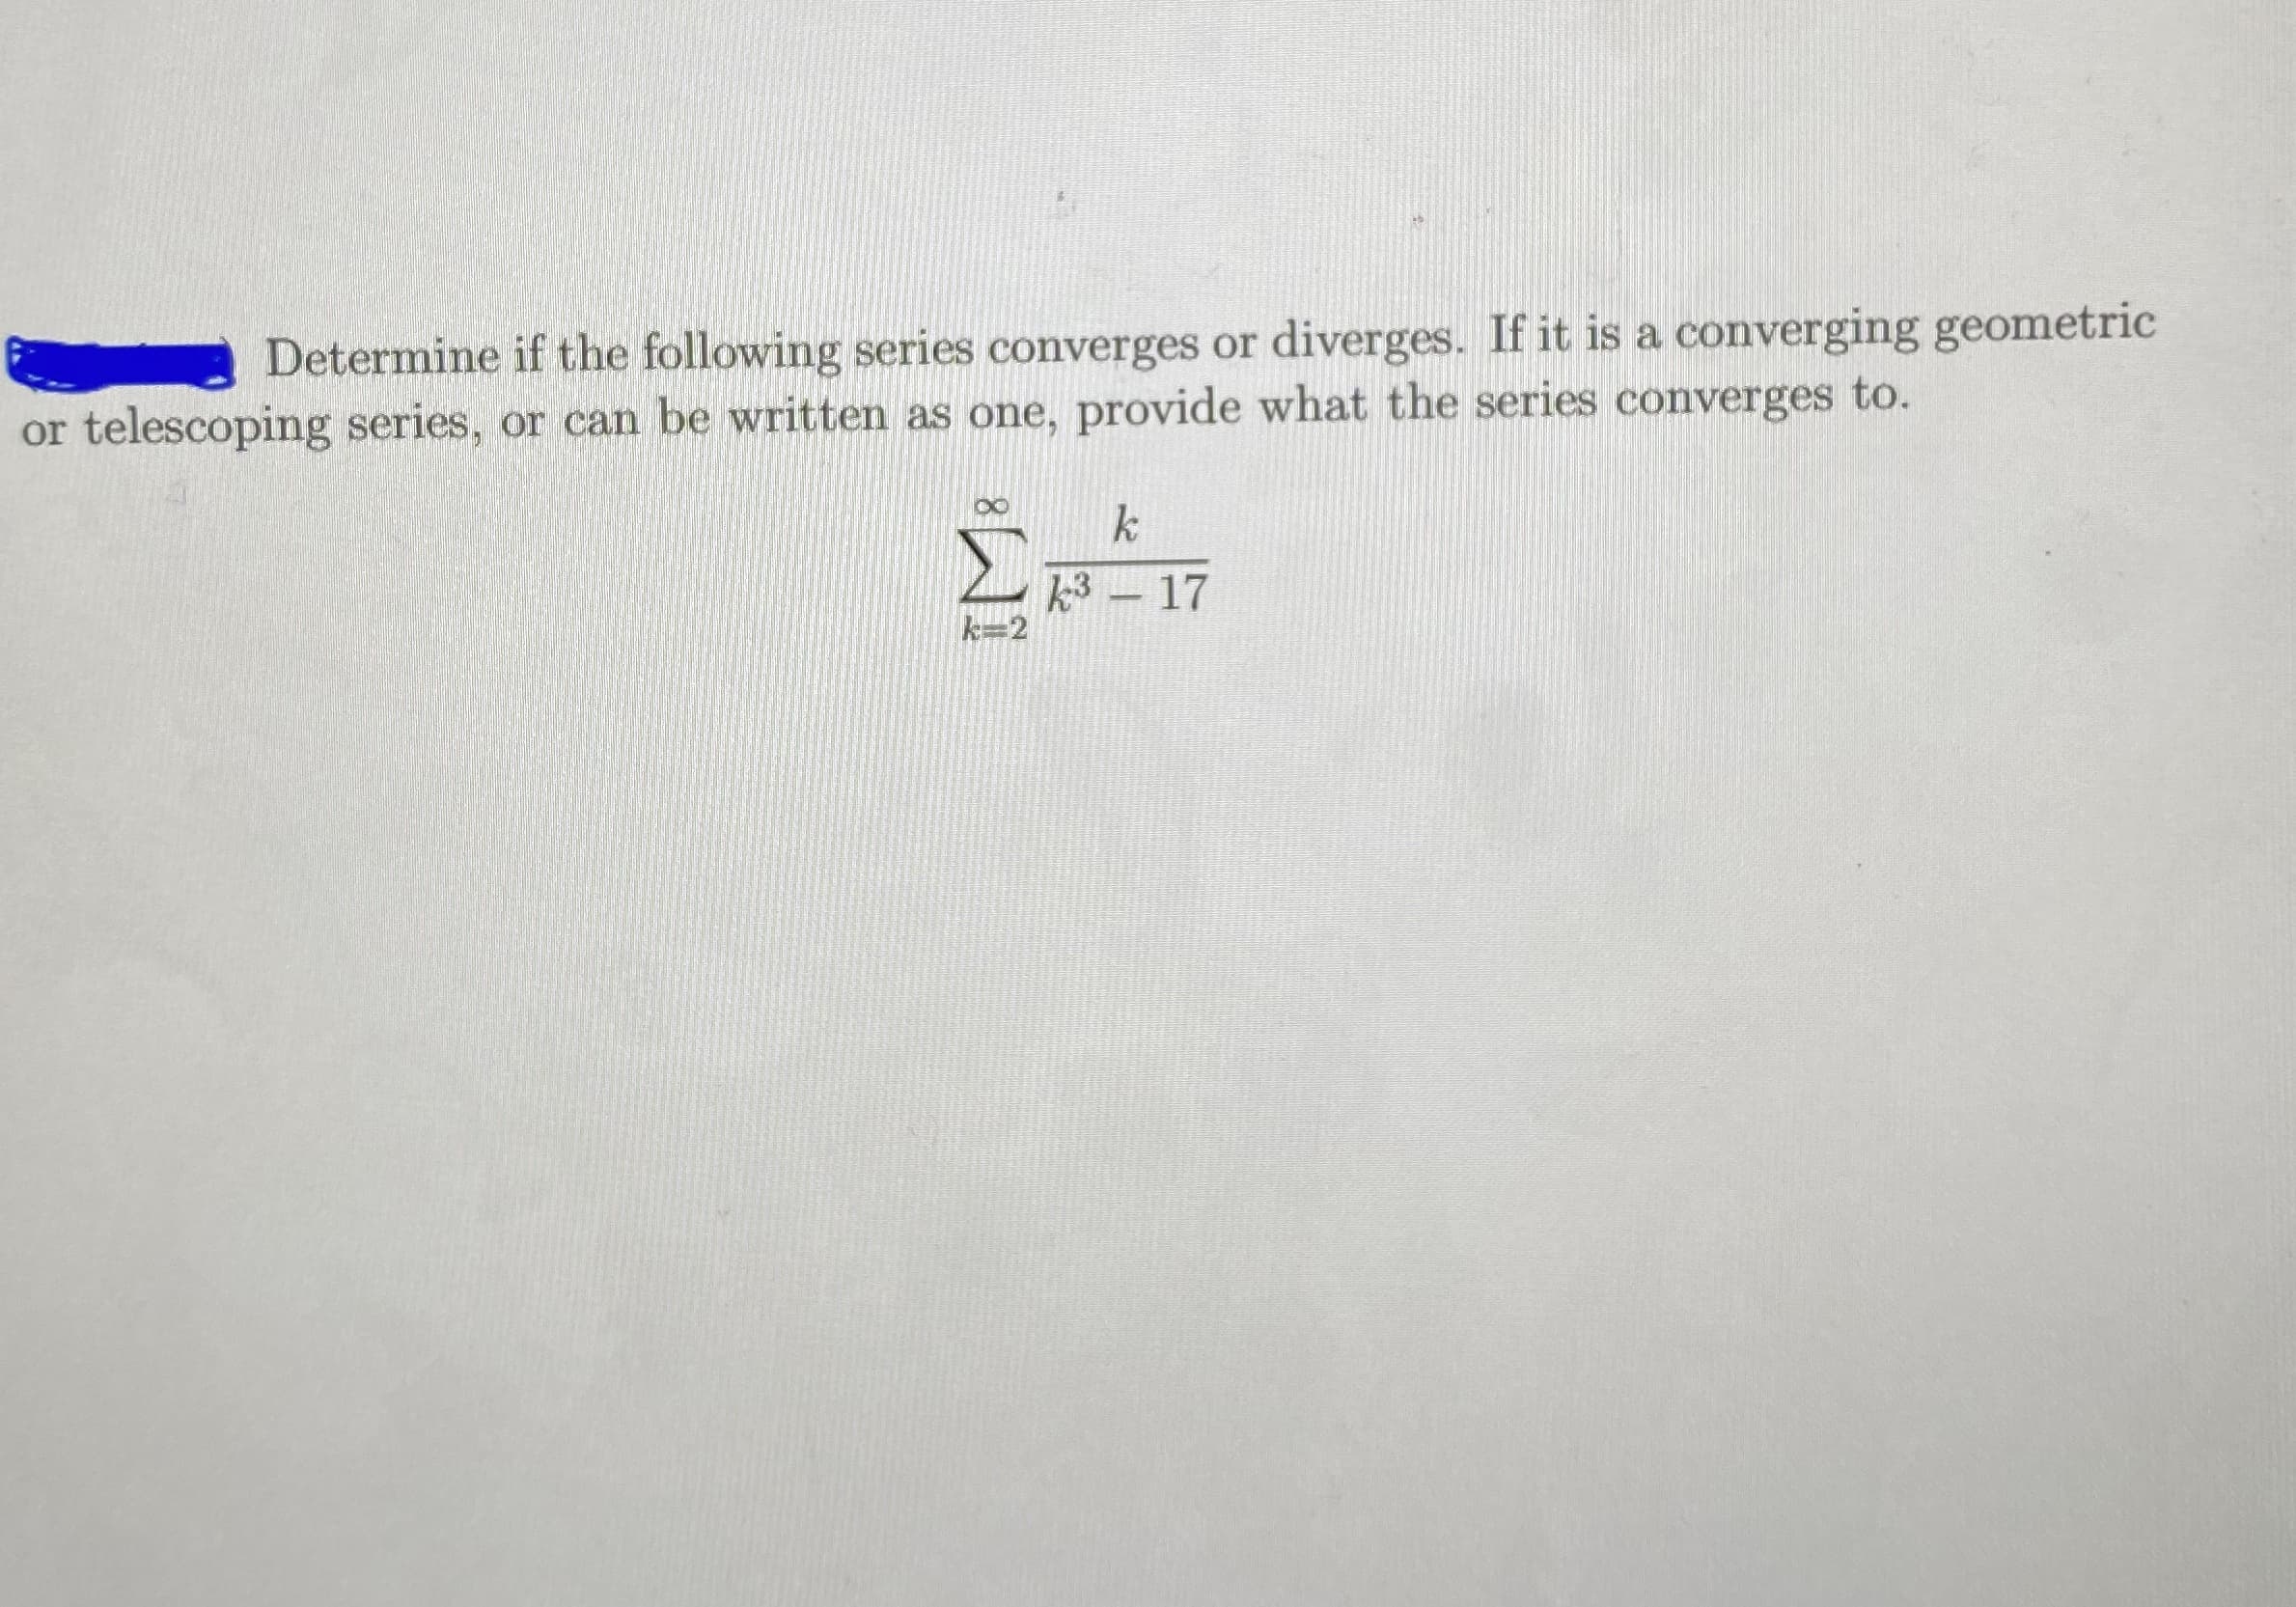 Determine if the following series converges or diverges. If it is a converging geometric
or telescoping series, or can be written as one, provide what the series converges to.
k
3- 17
k=2
